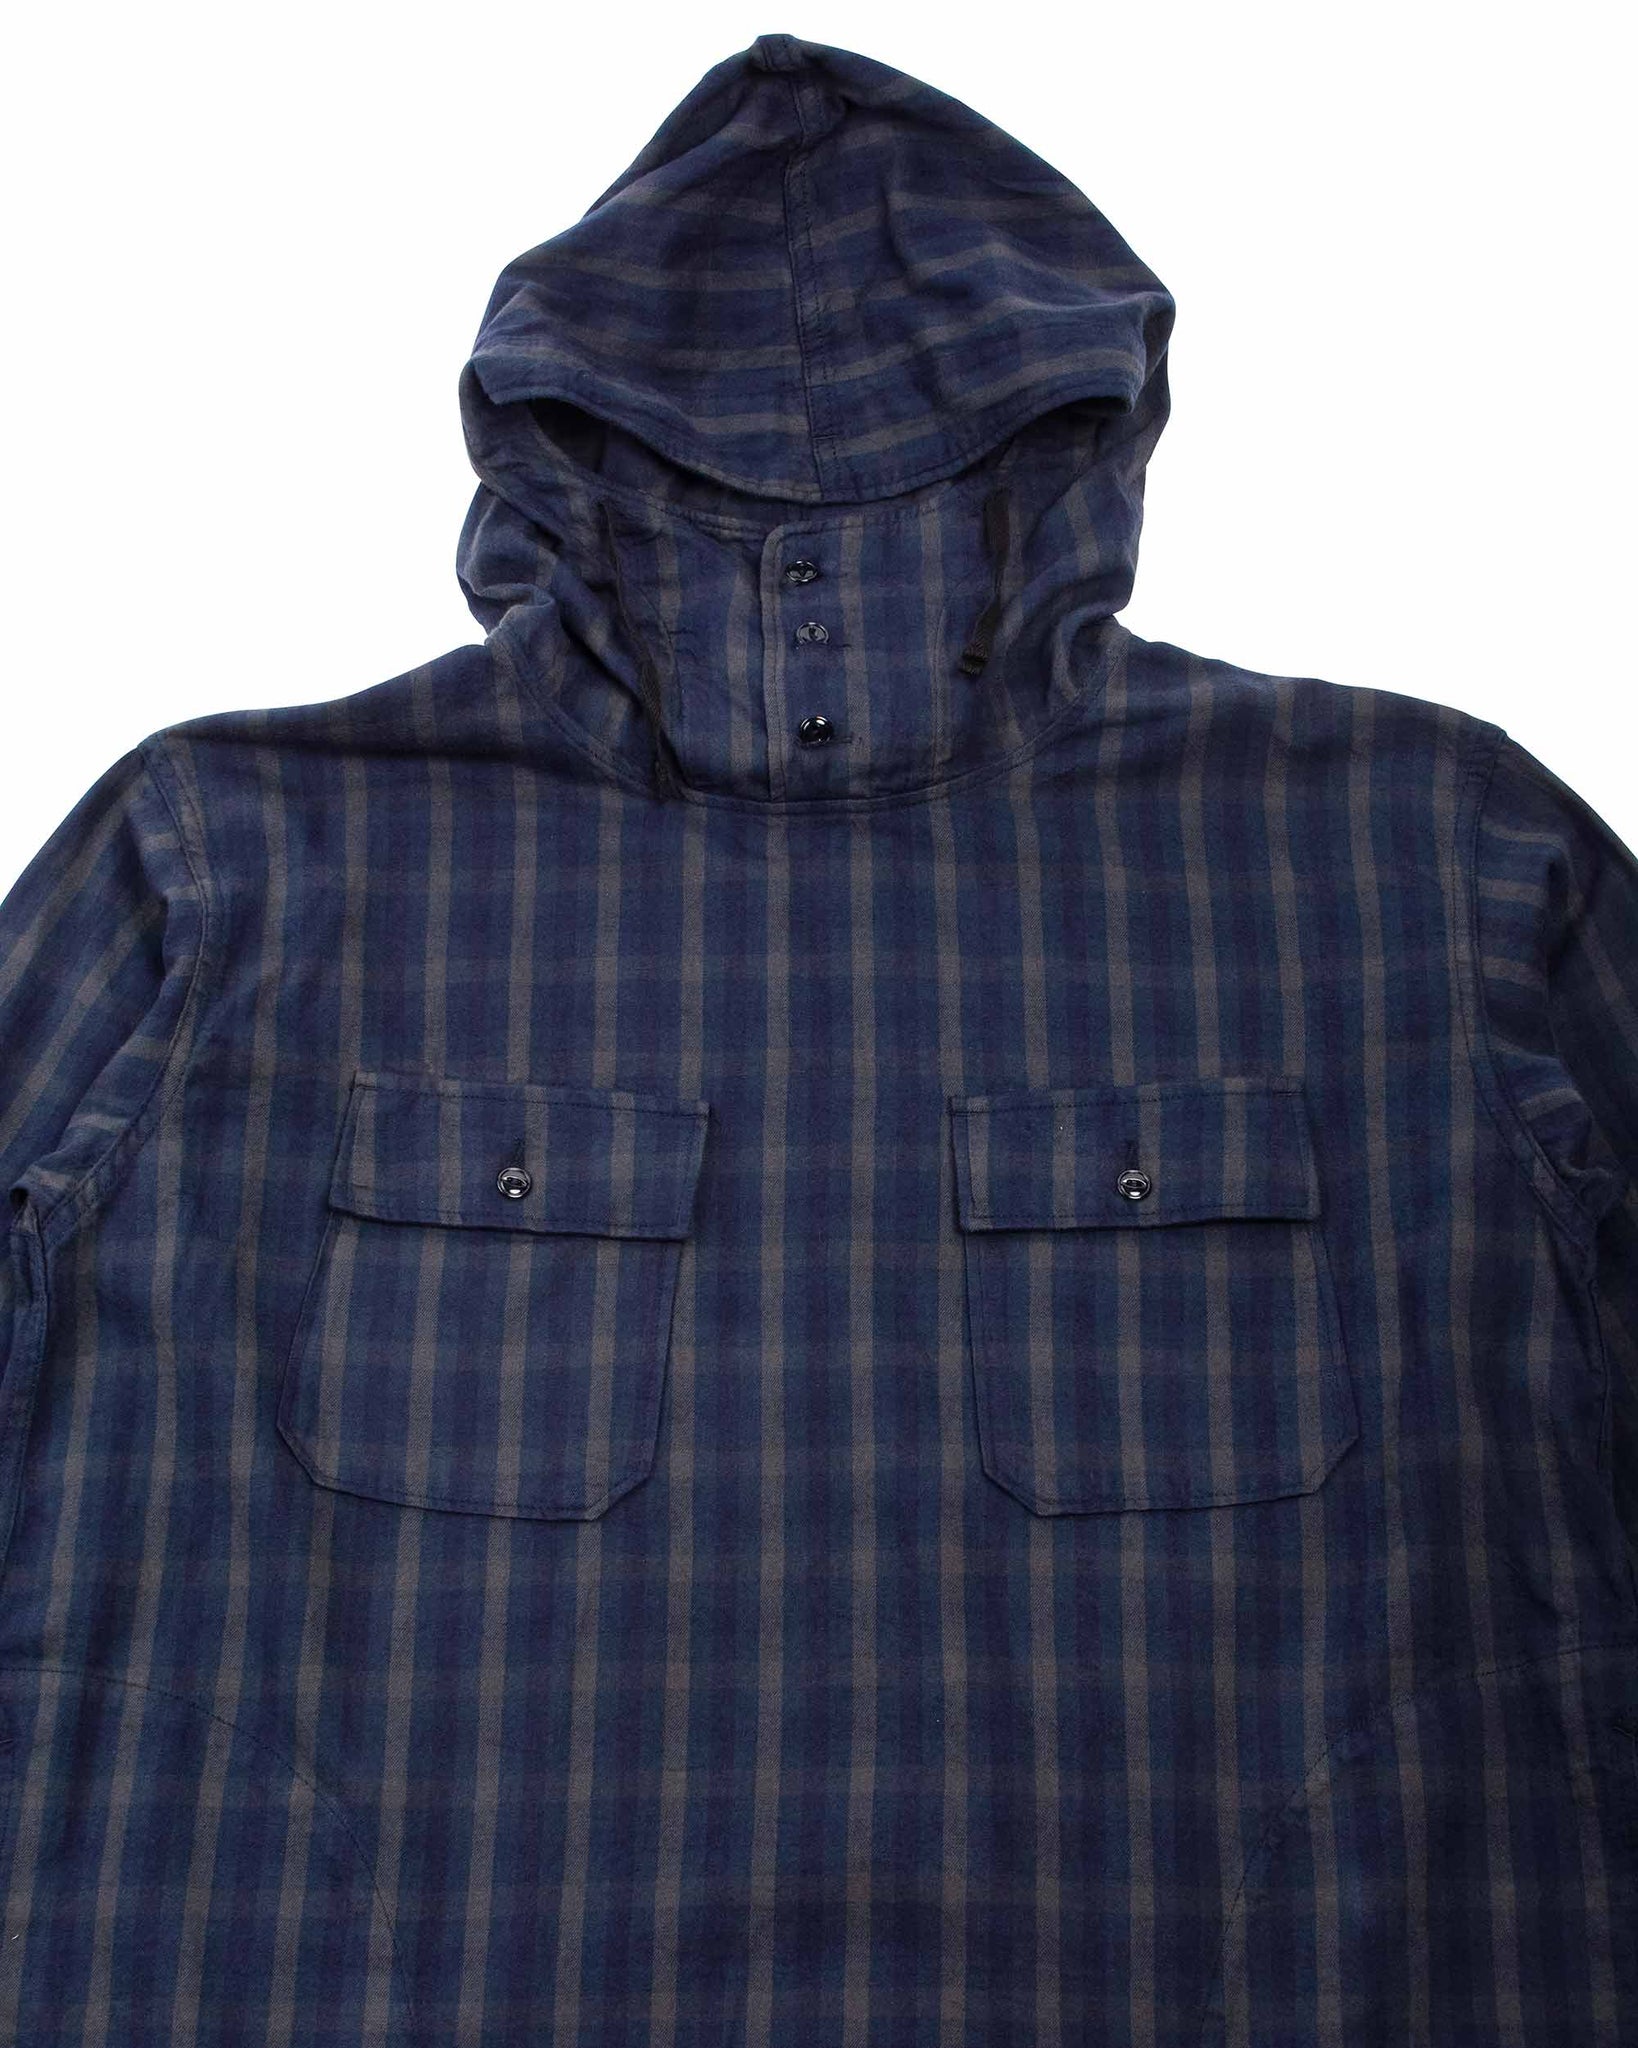 Engineered Garments Cagoule Shirt Navy/Grey Cotton Flannel Plaid Details